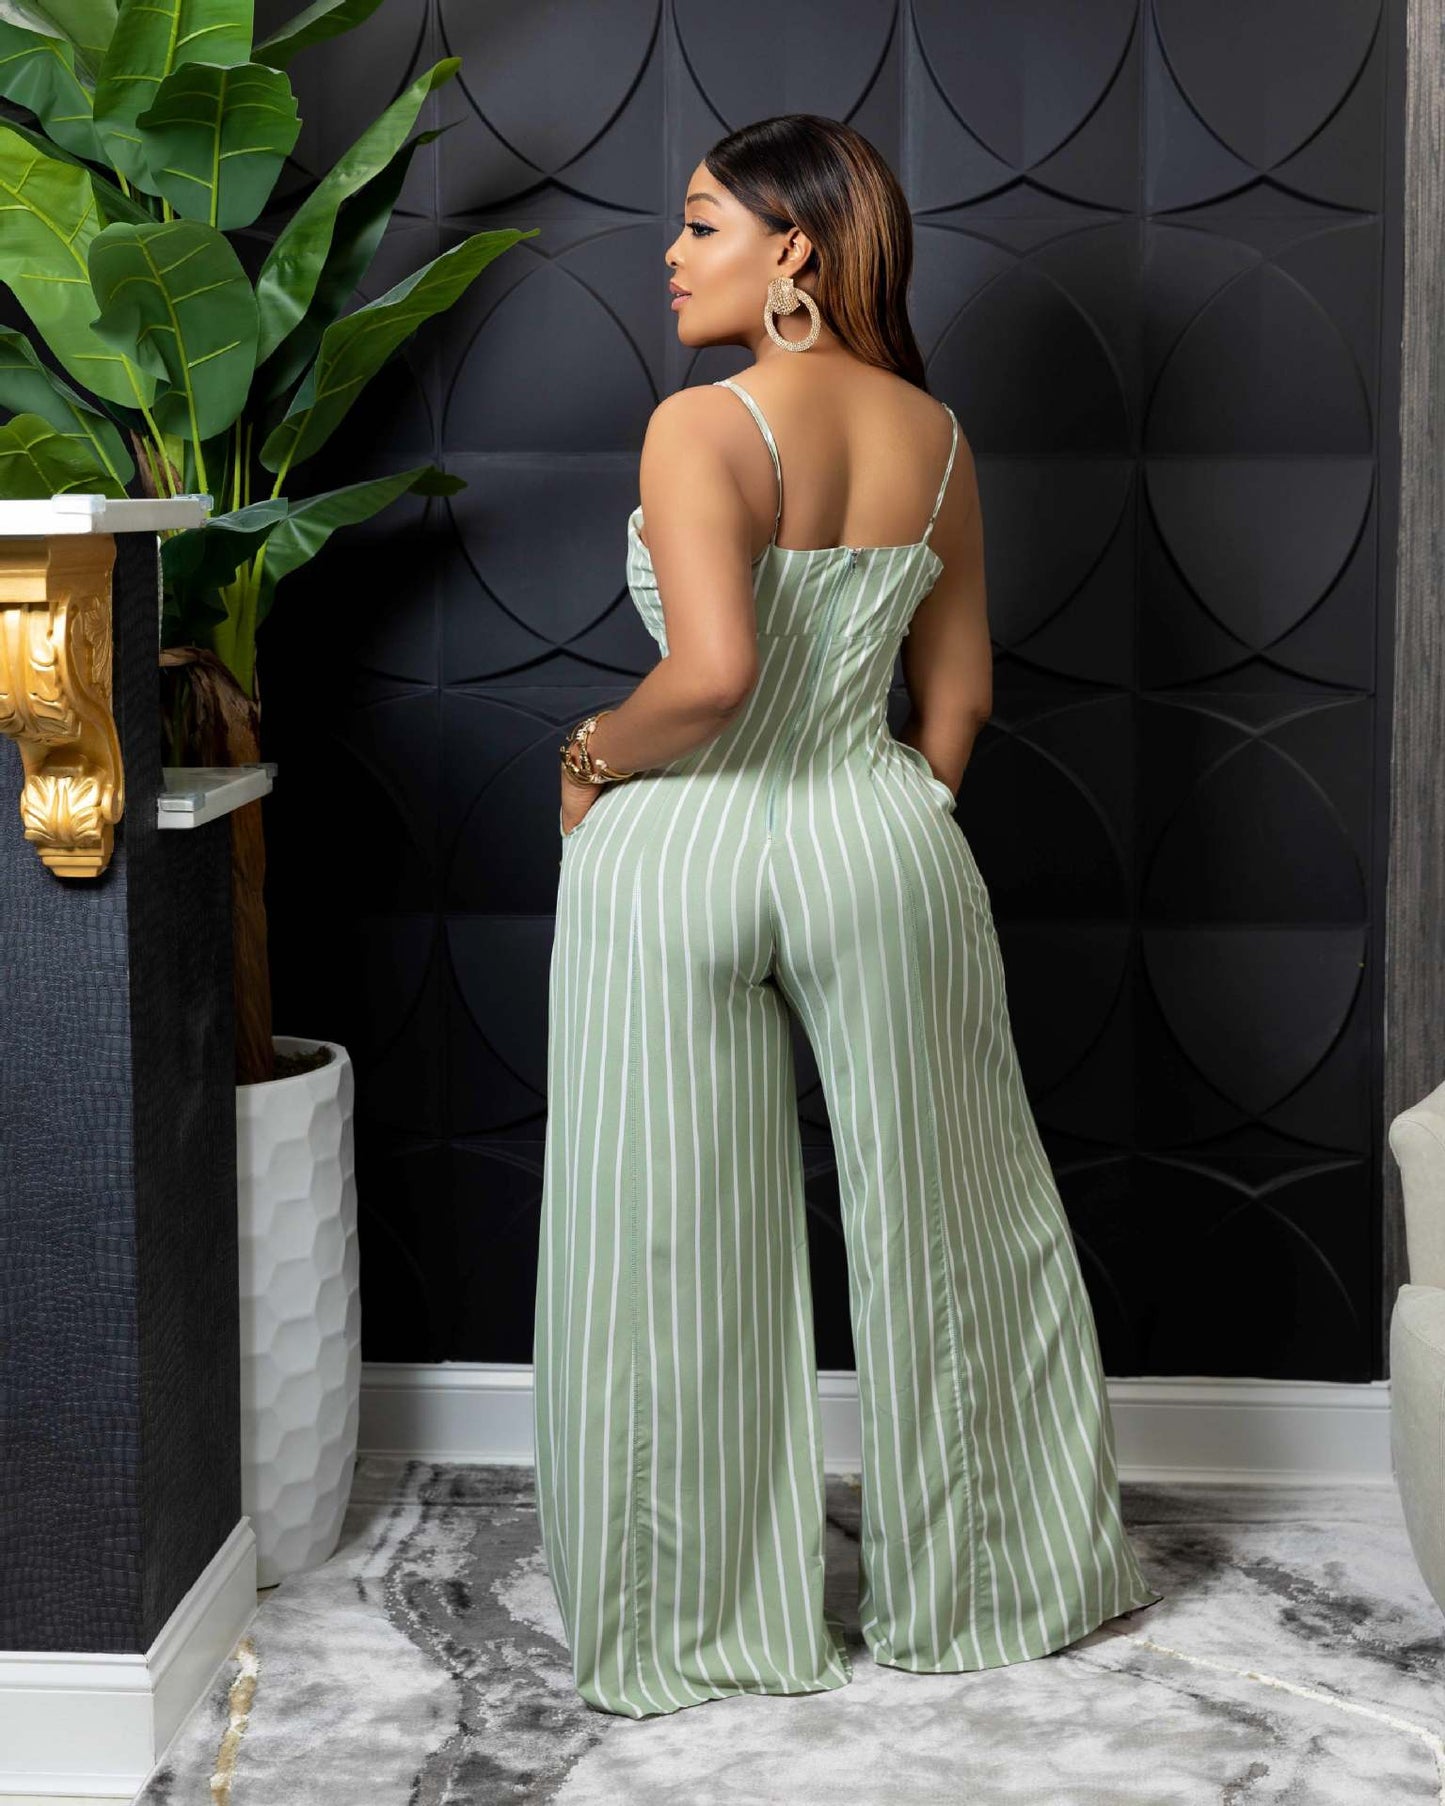 Sexy Backless Striped Wide Legs Jumpsuits